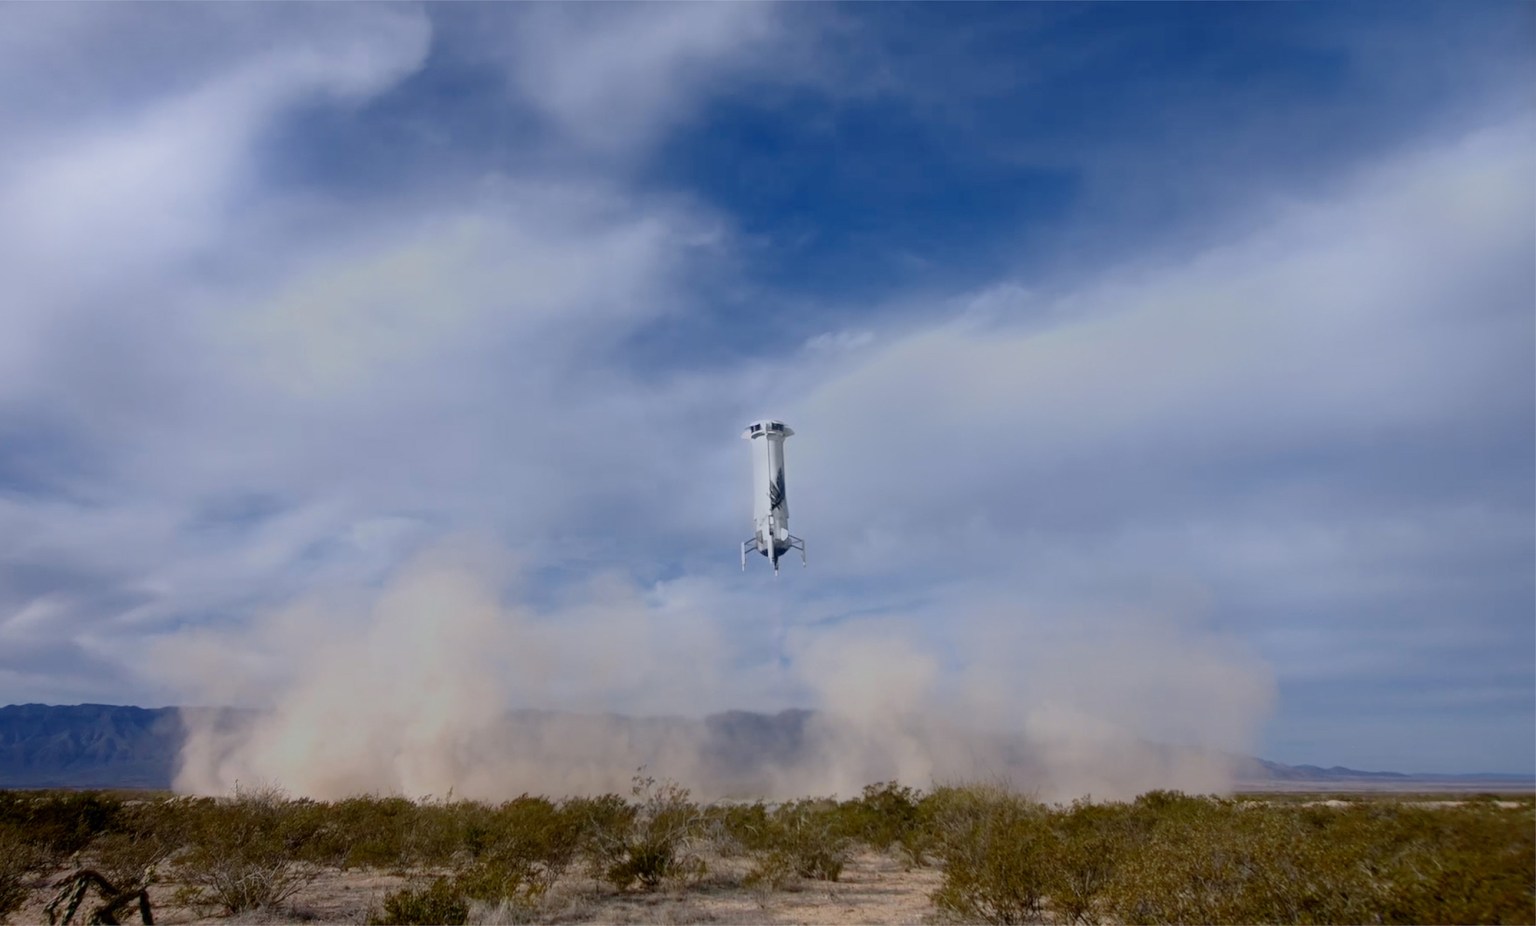 Reusable rocket coming in for a vertical landing, kicking up a plume of dust from the arid ground. The blue sky is full of wispy clouds.